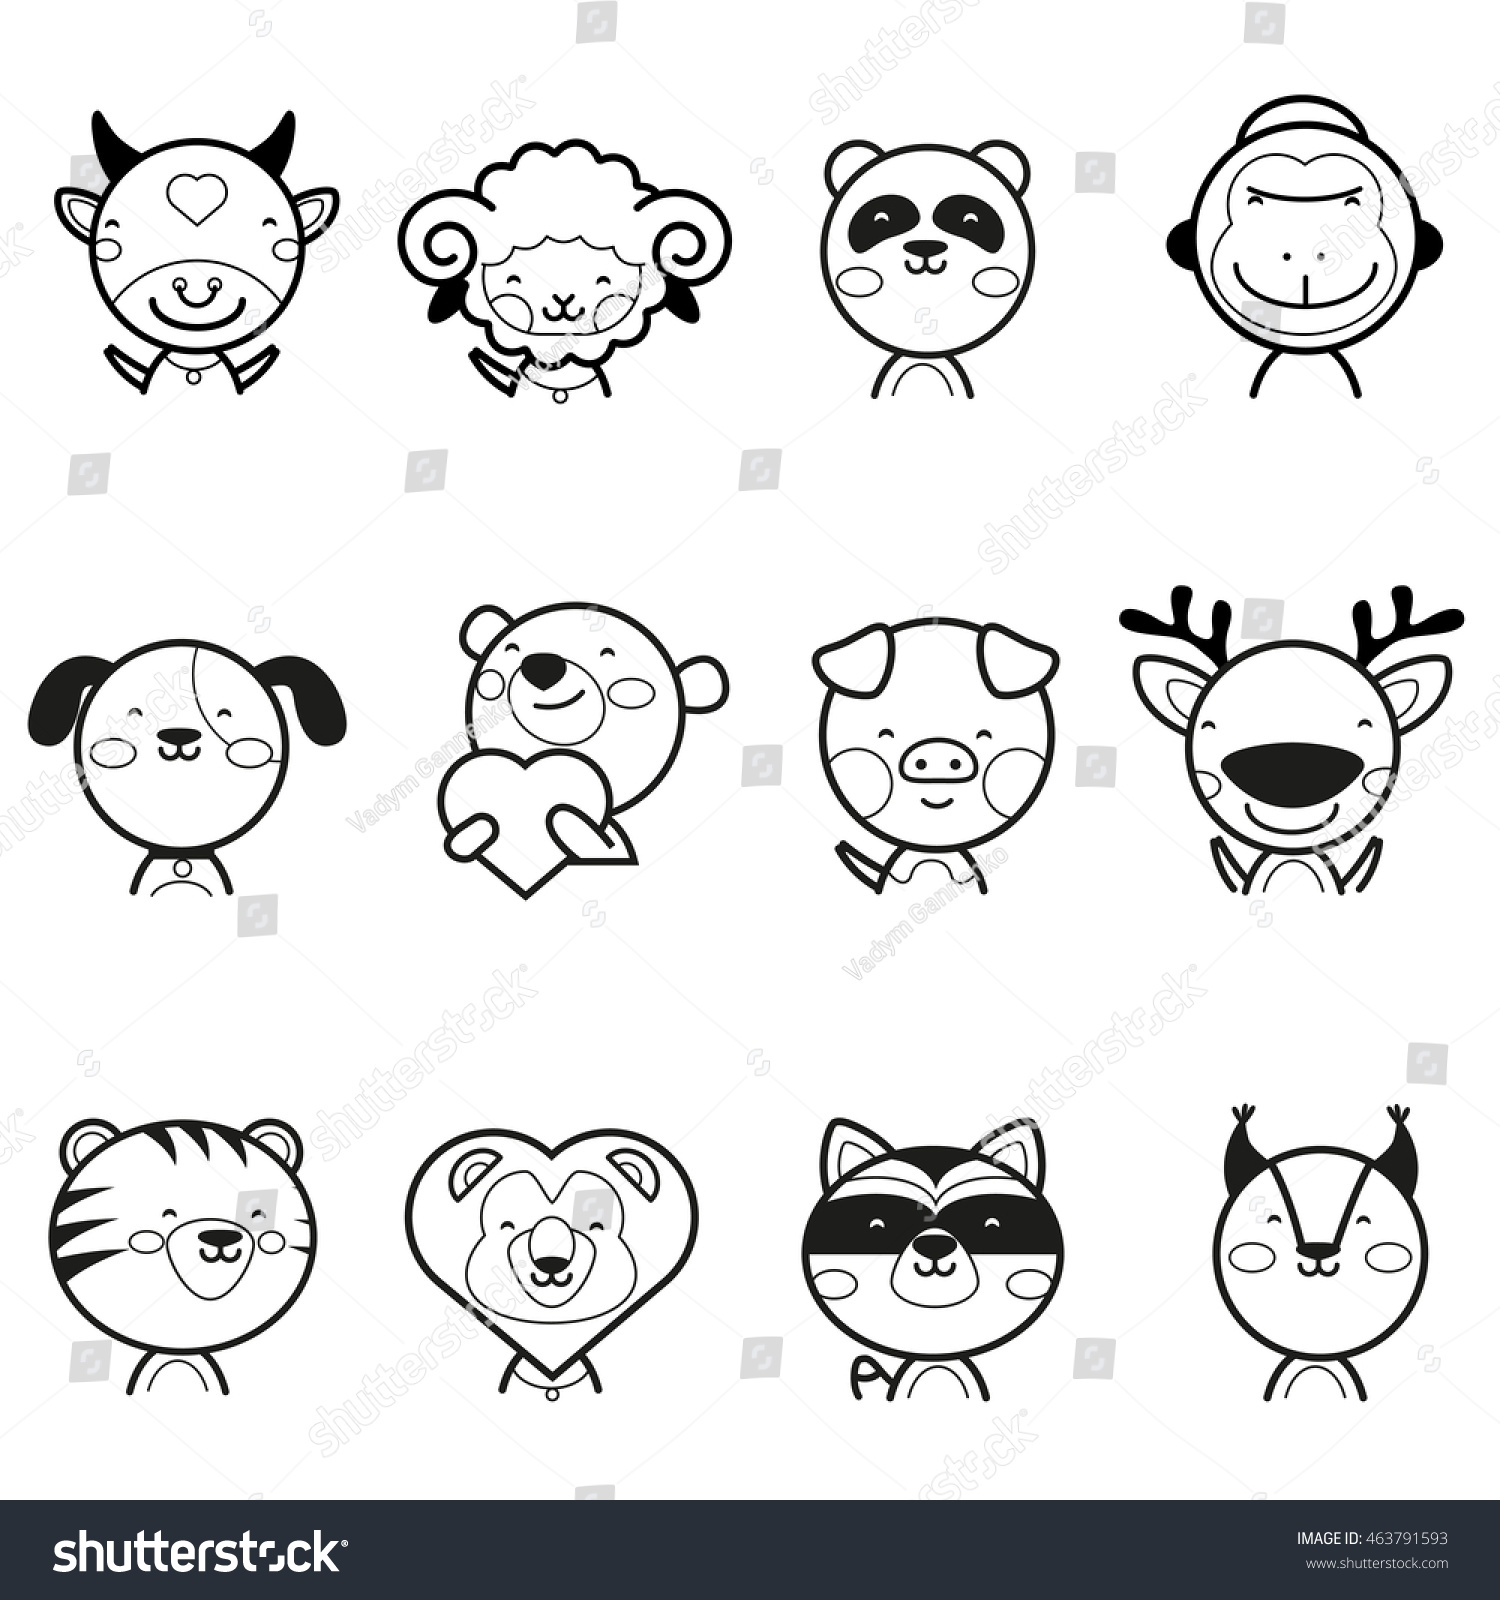 Set Cute Animals Icons Vector Illustrations Stock Vector 463791593 ...